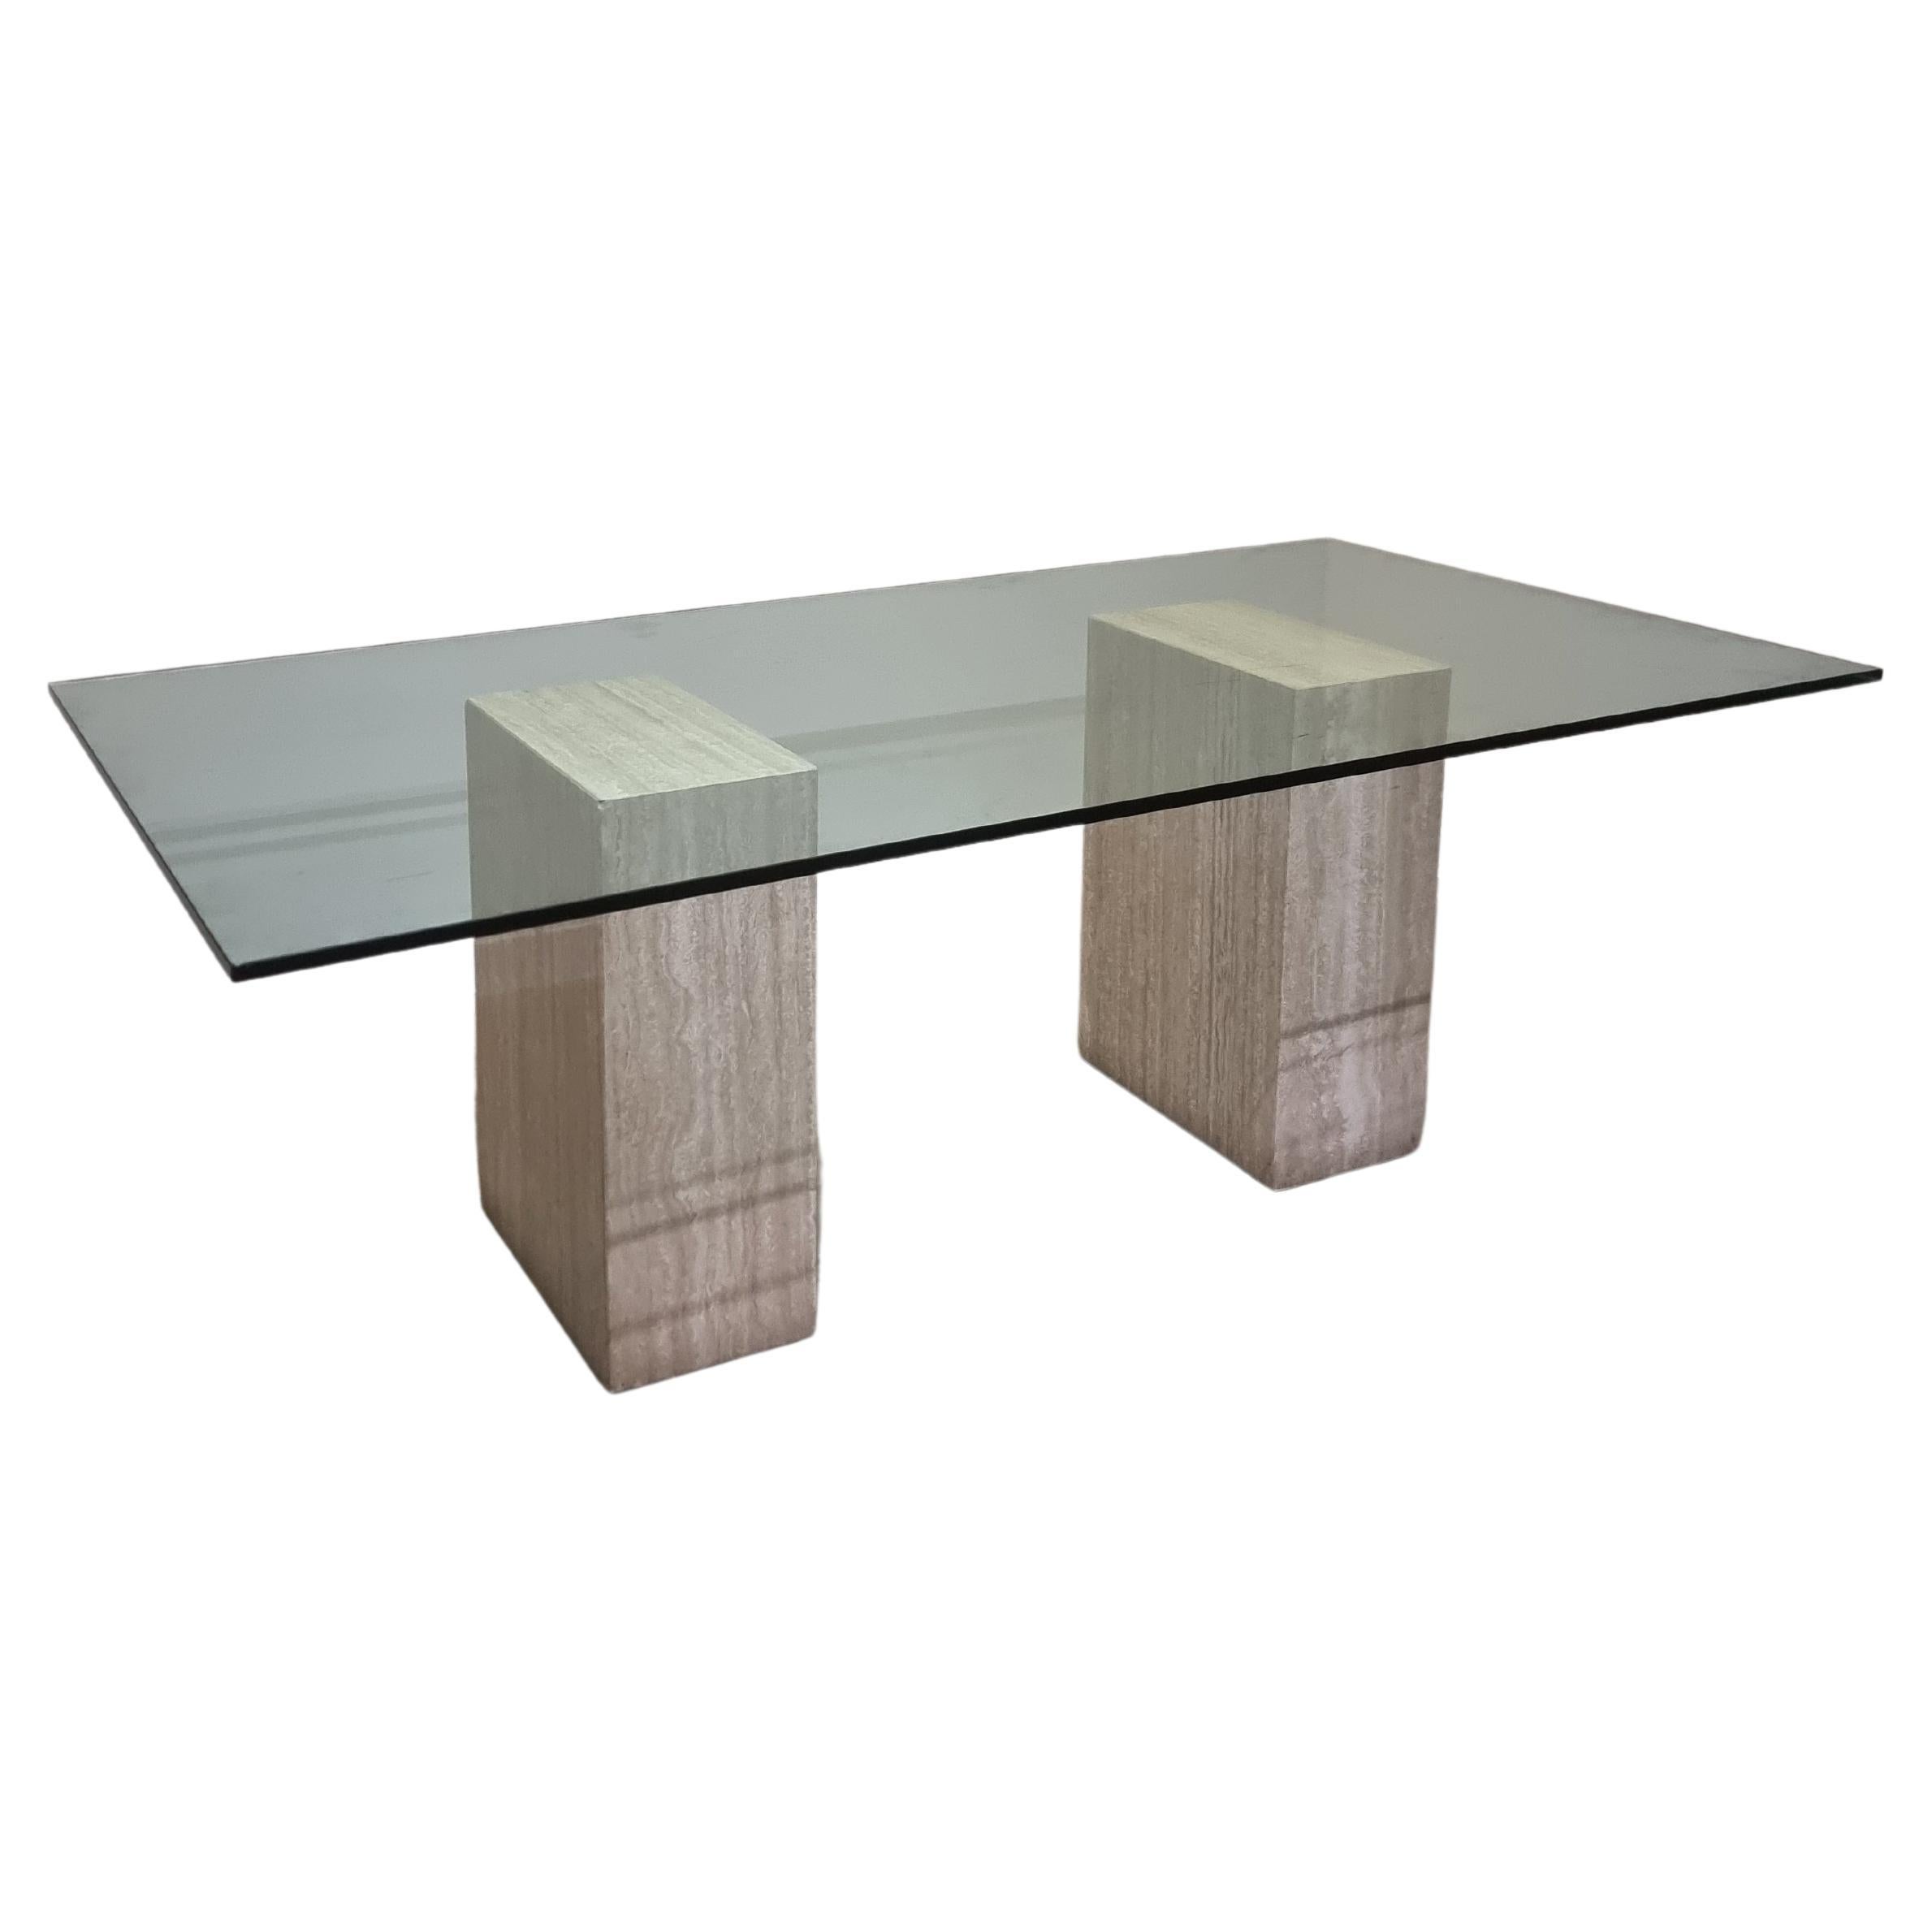 Impressive Italian Travertine Diningtable with Glass Top 1970s For Sale